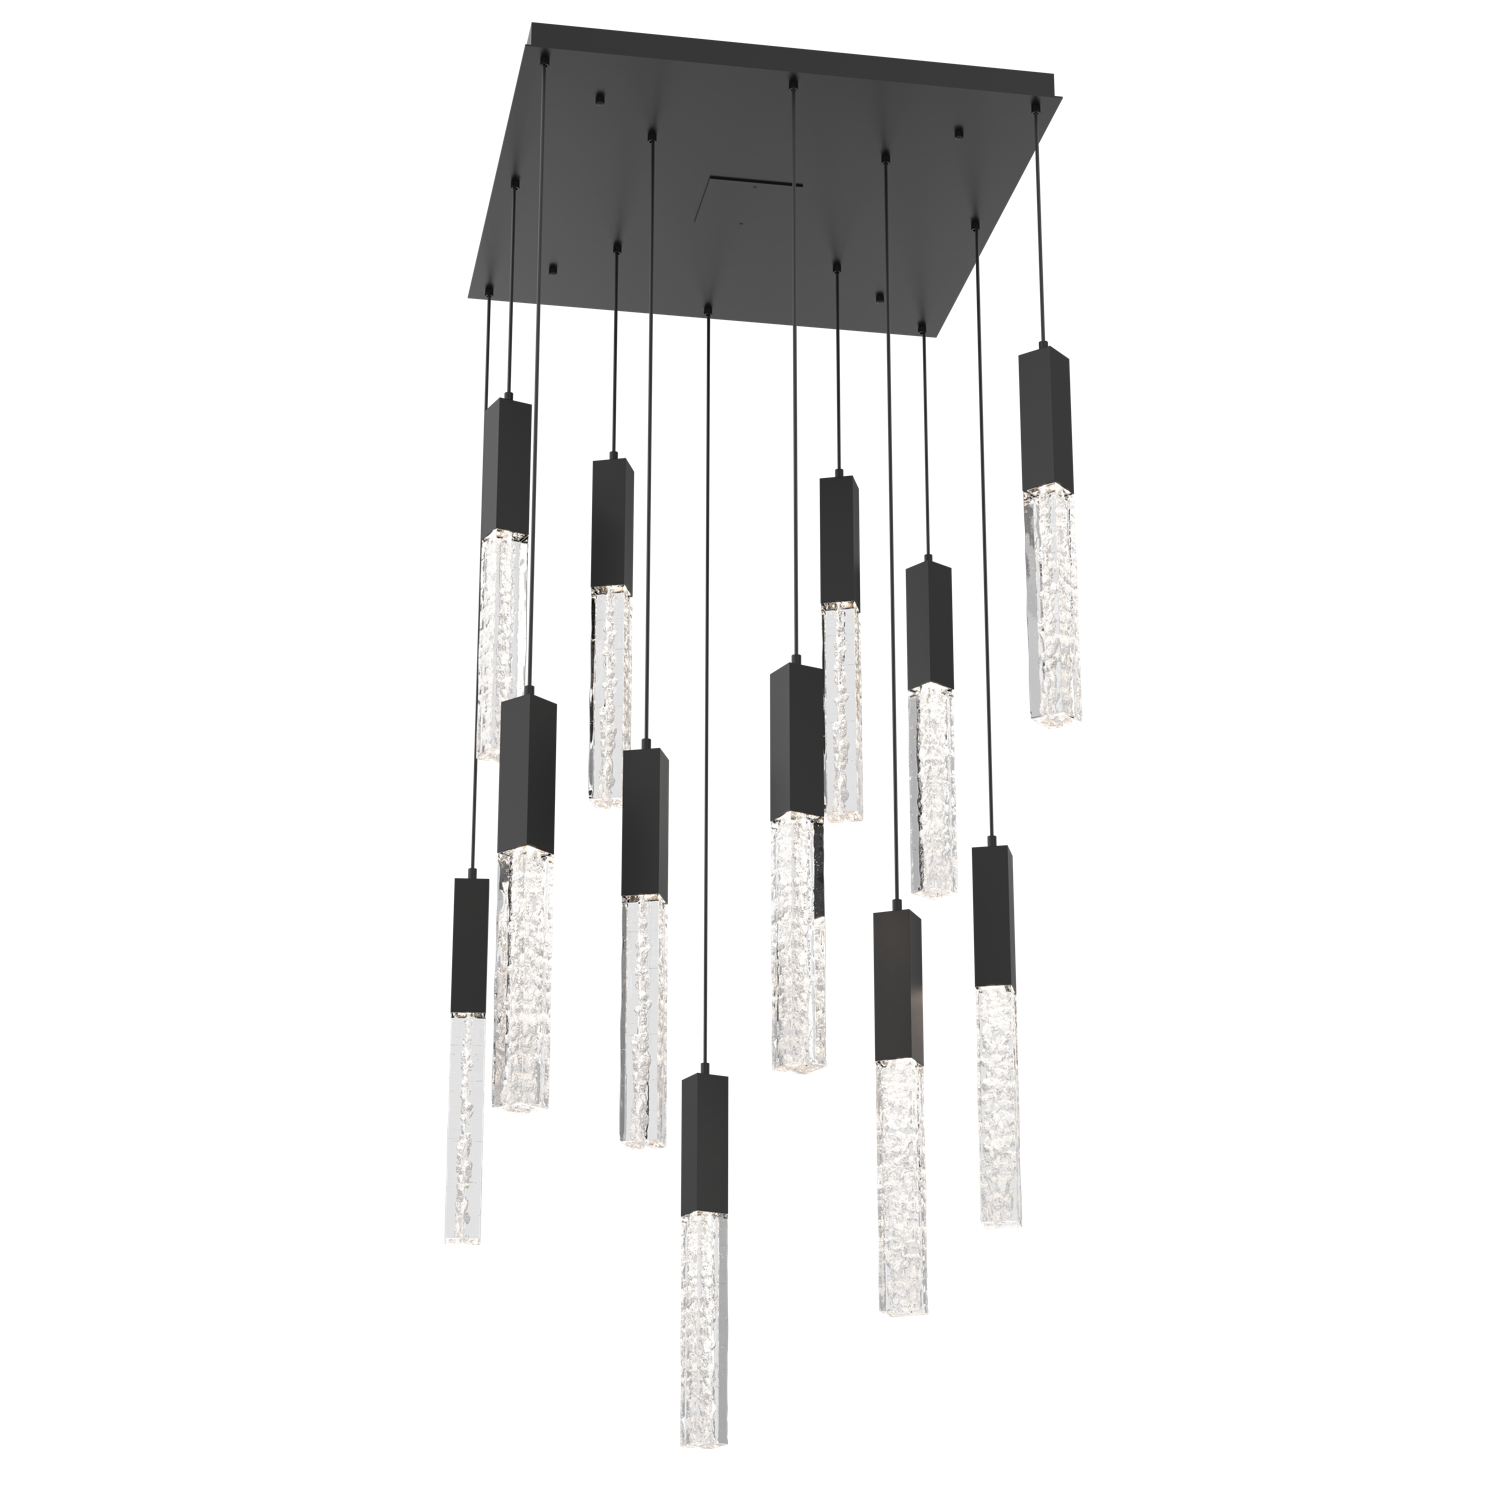 CHB0060-12-MB-GC-Hammerton-Studio-Axis-12-Light-Pendant-Chandelier-with-Matte-Black-finish-and-clear-cast-glass-and-LED-lamping